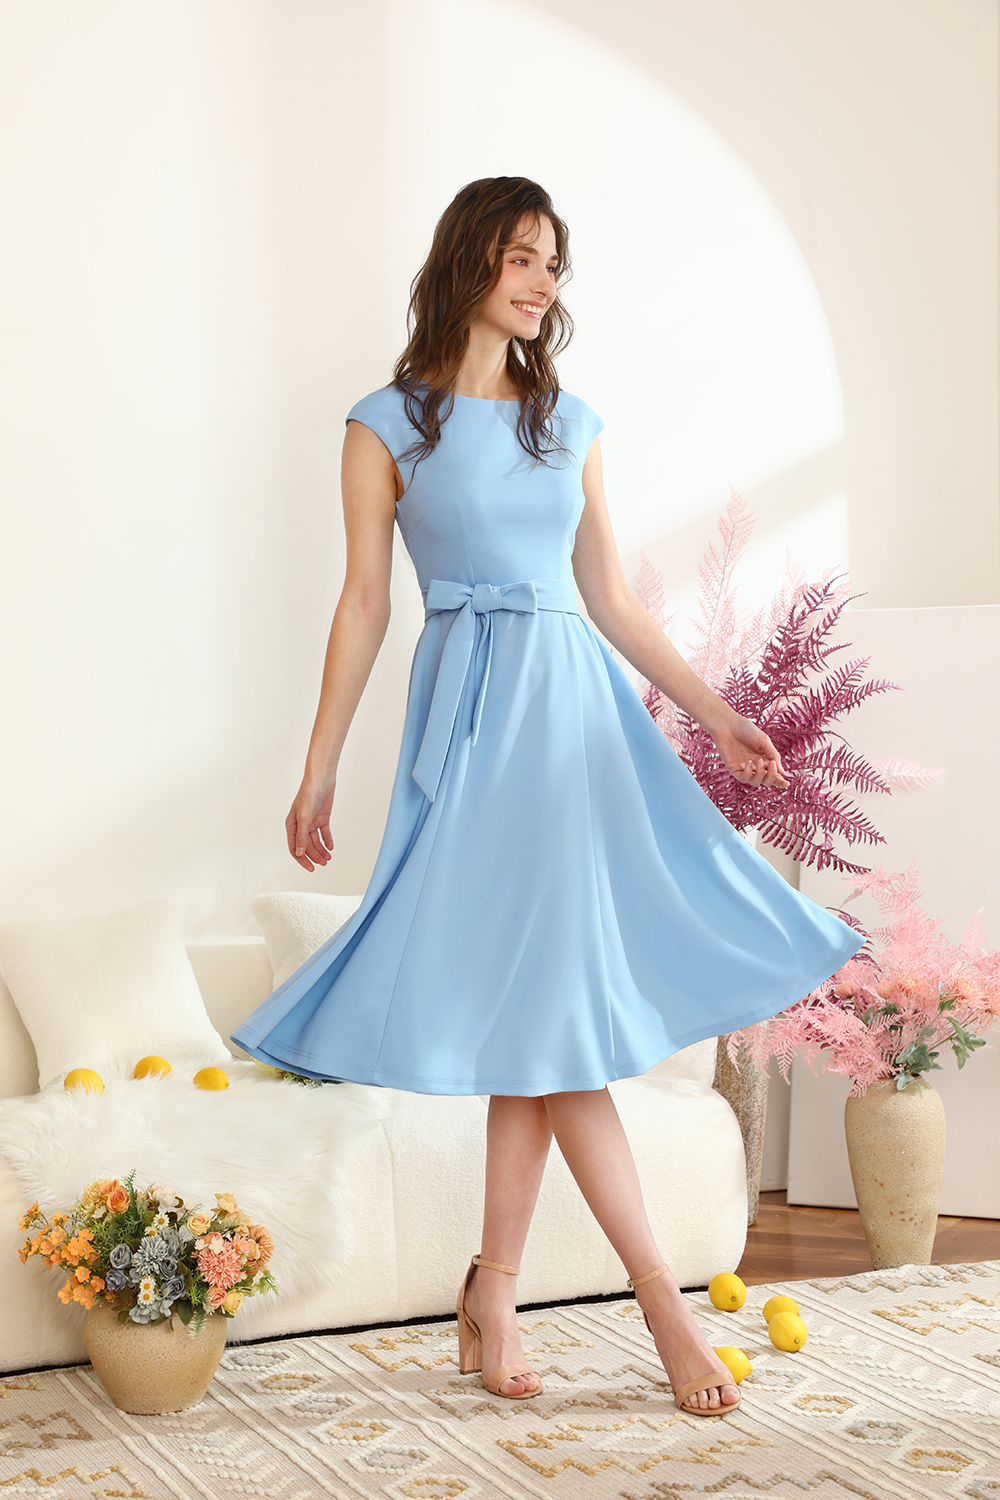 A-Line Knee-Length Blue Cocktail Dress with Cap Sleeves, Vintage Style, Unique and Elegant